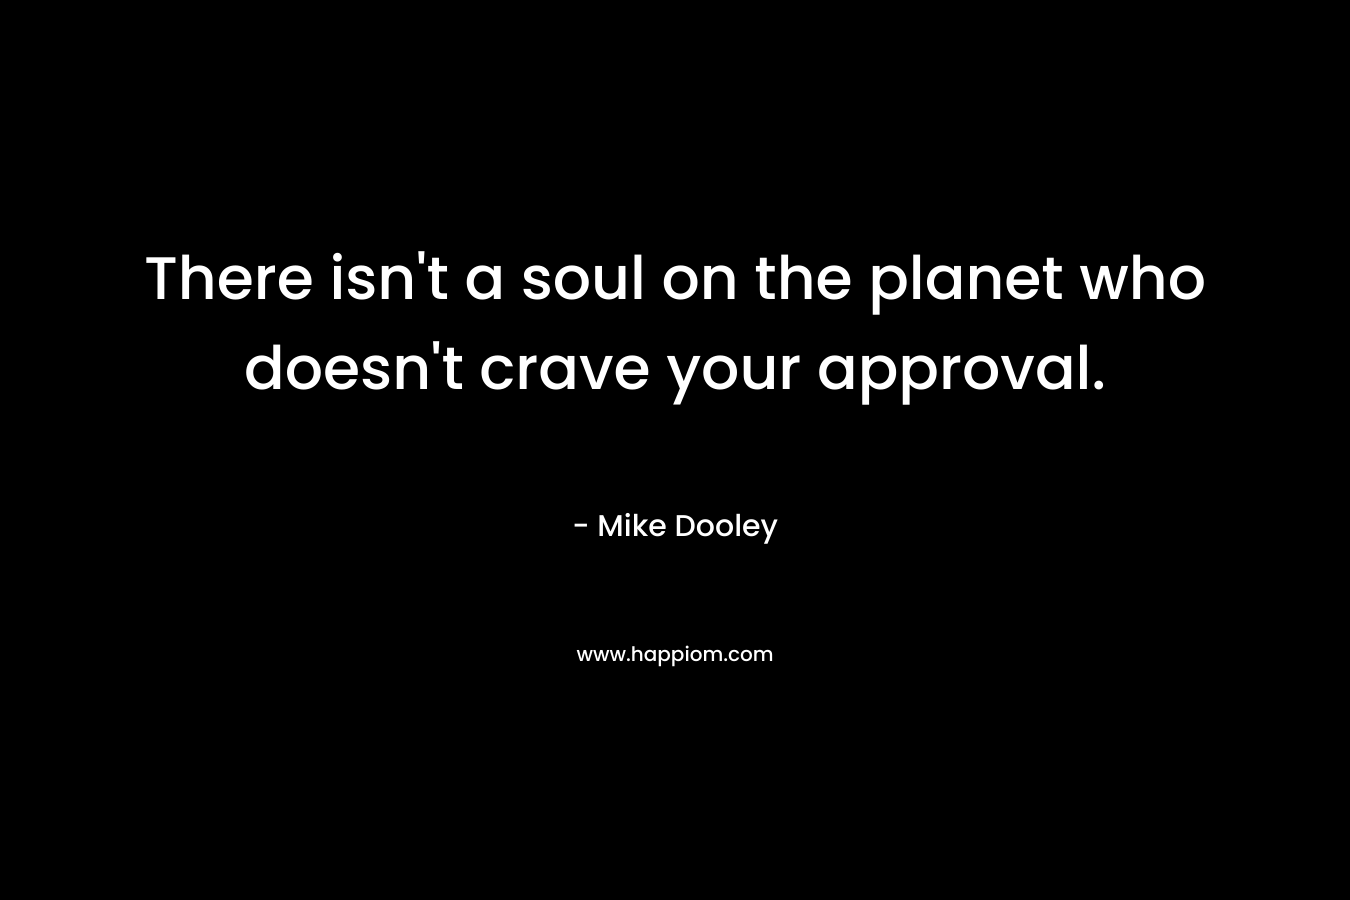 There isn't a soul on the planet who doesn't crave your approval.